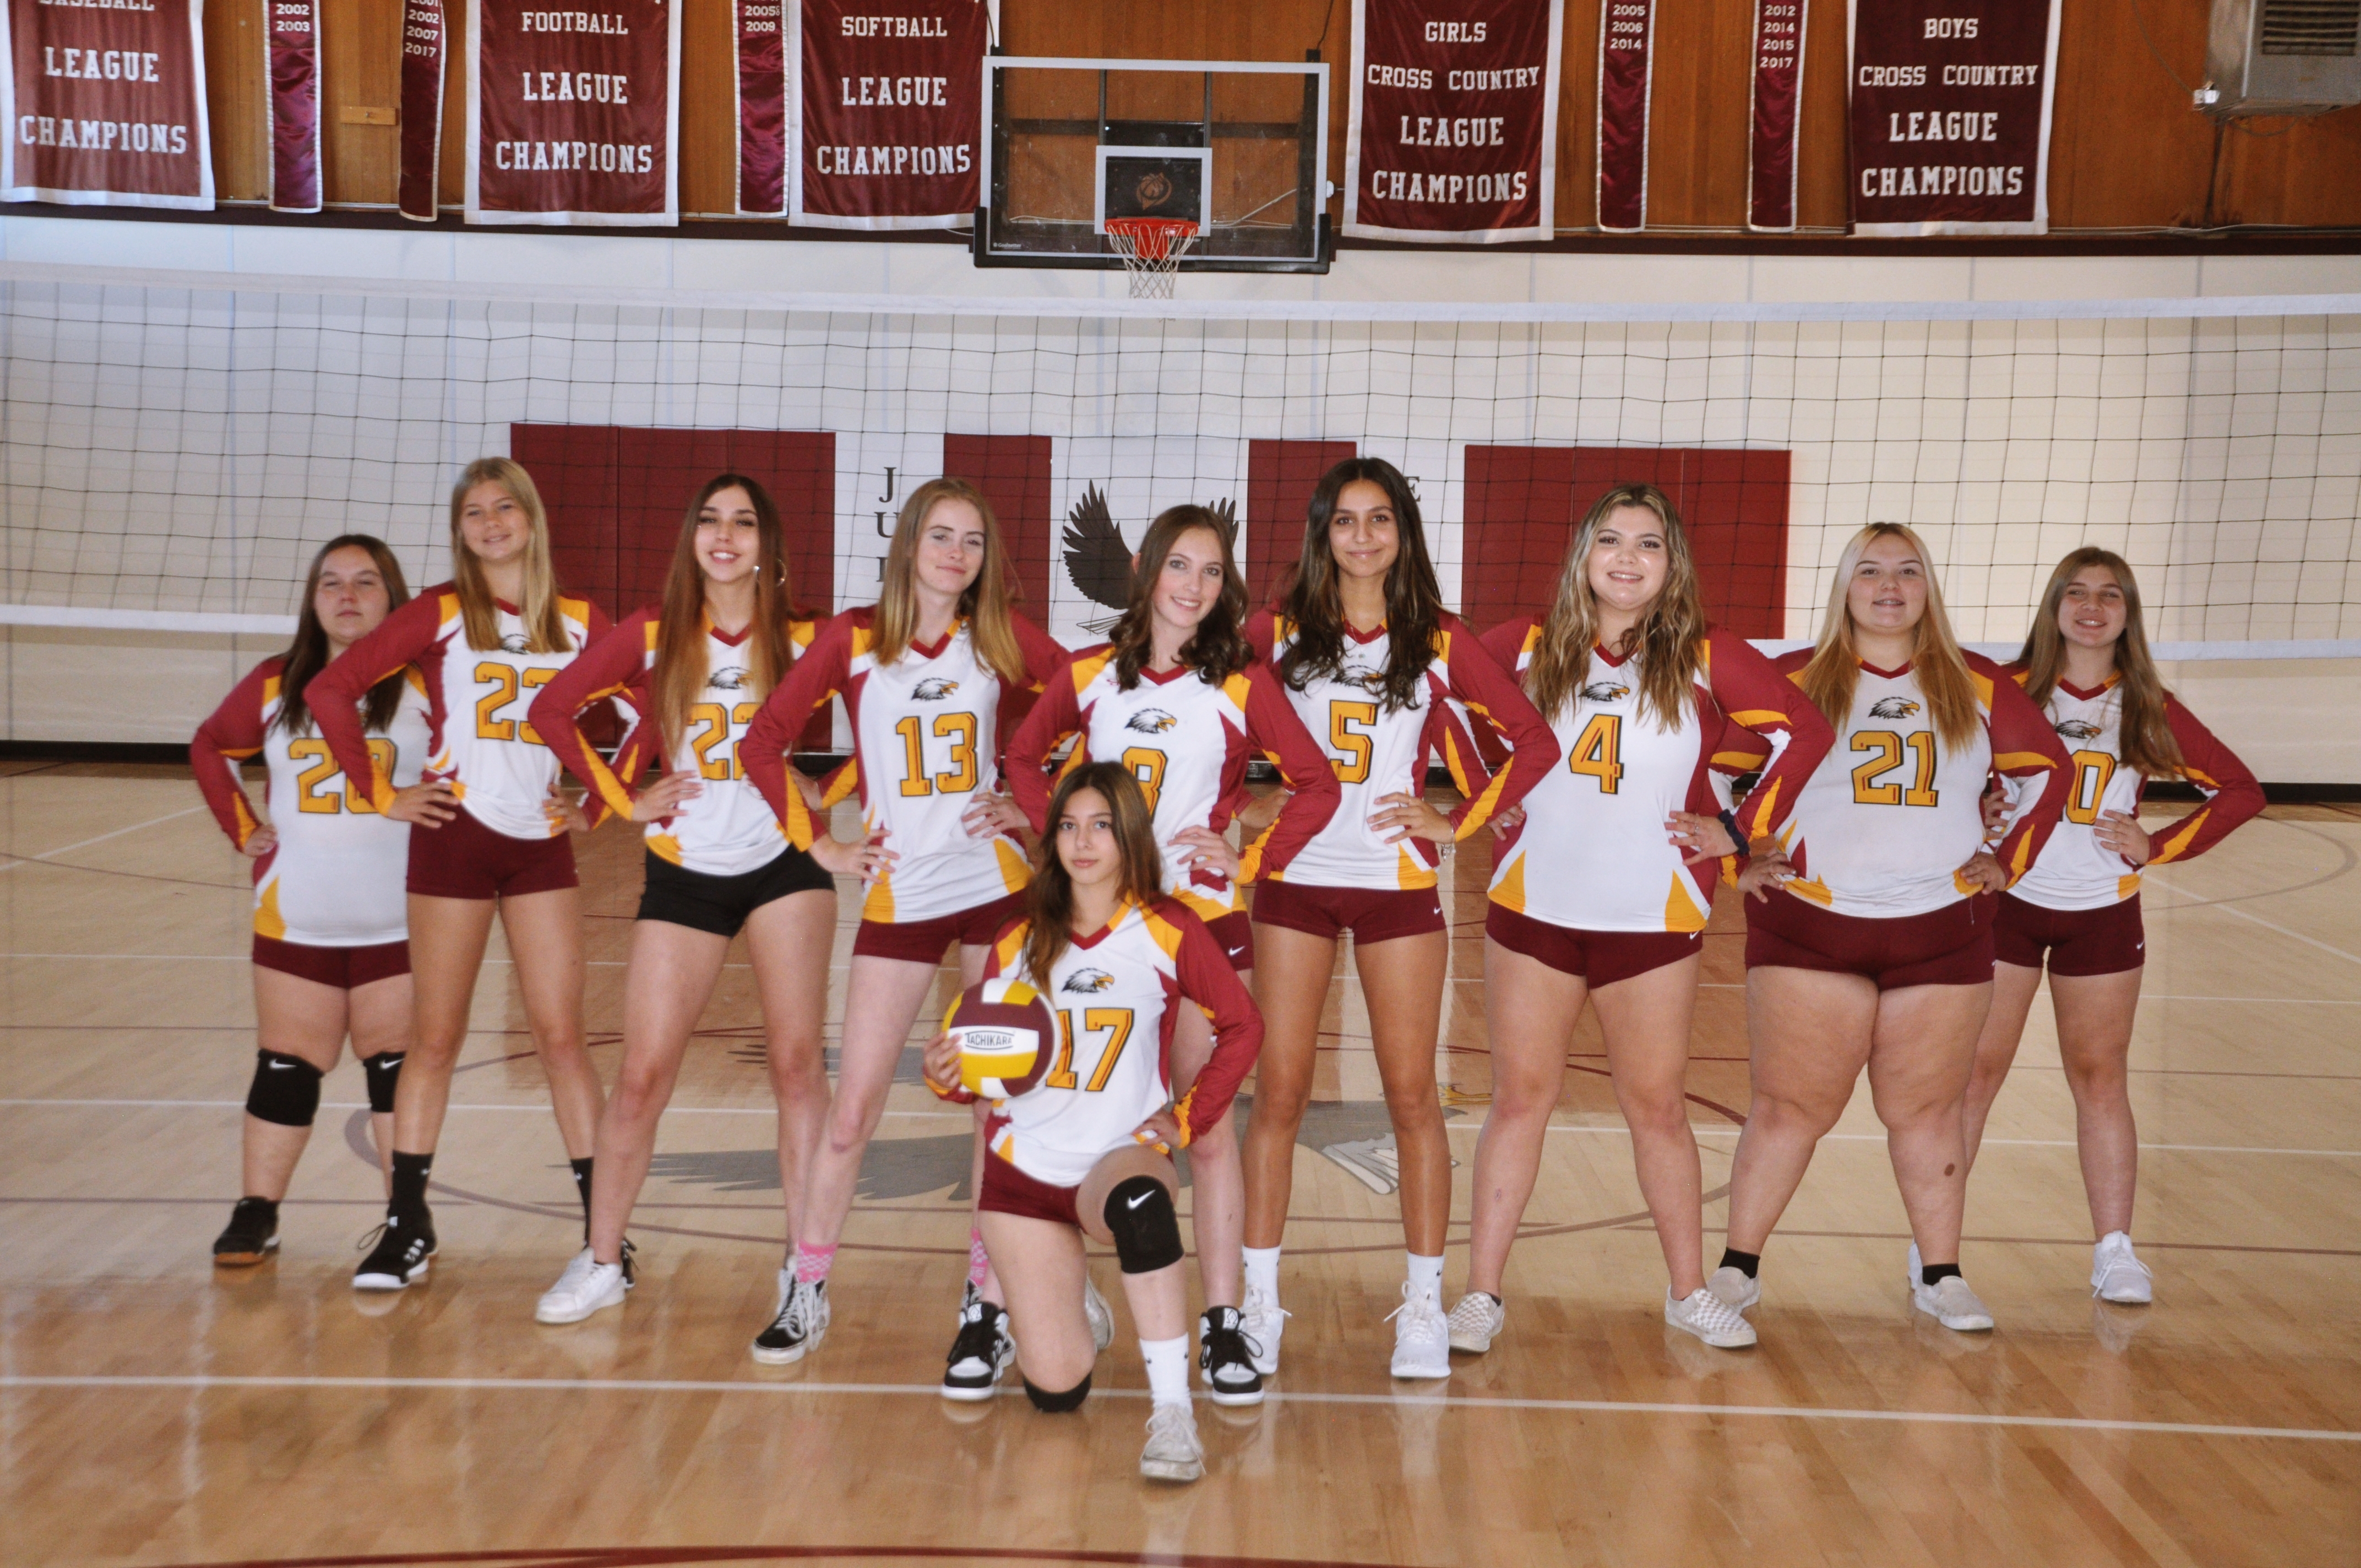 Group photo of the Volleyball team.